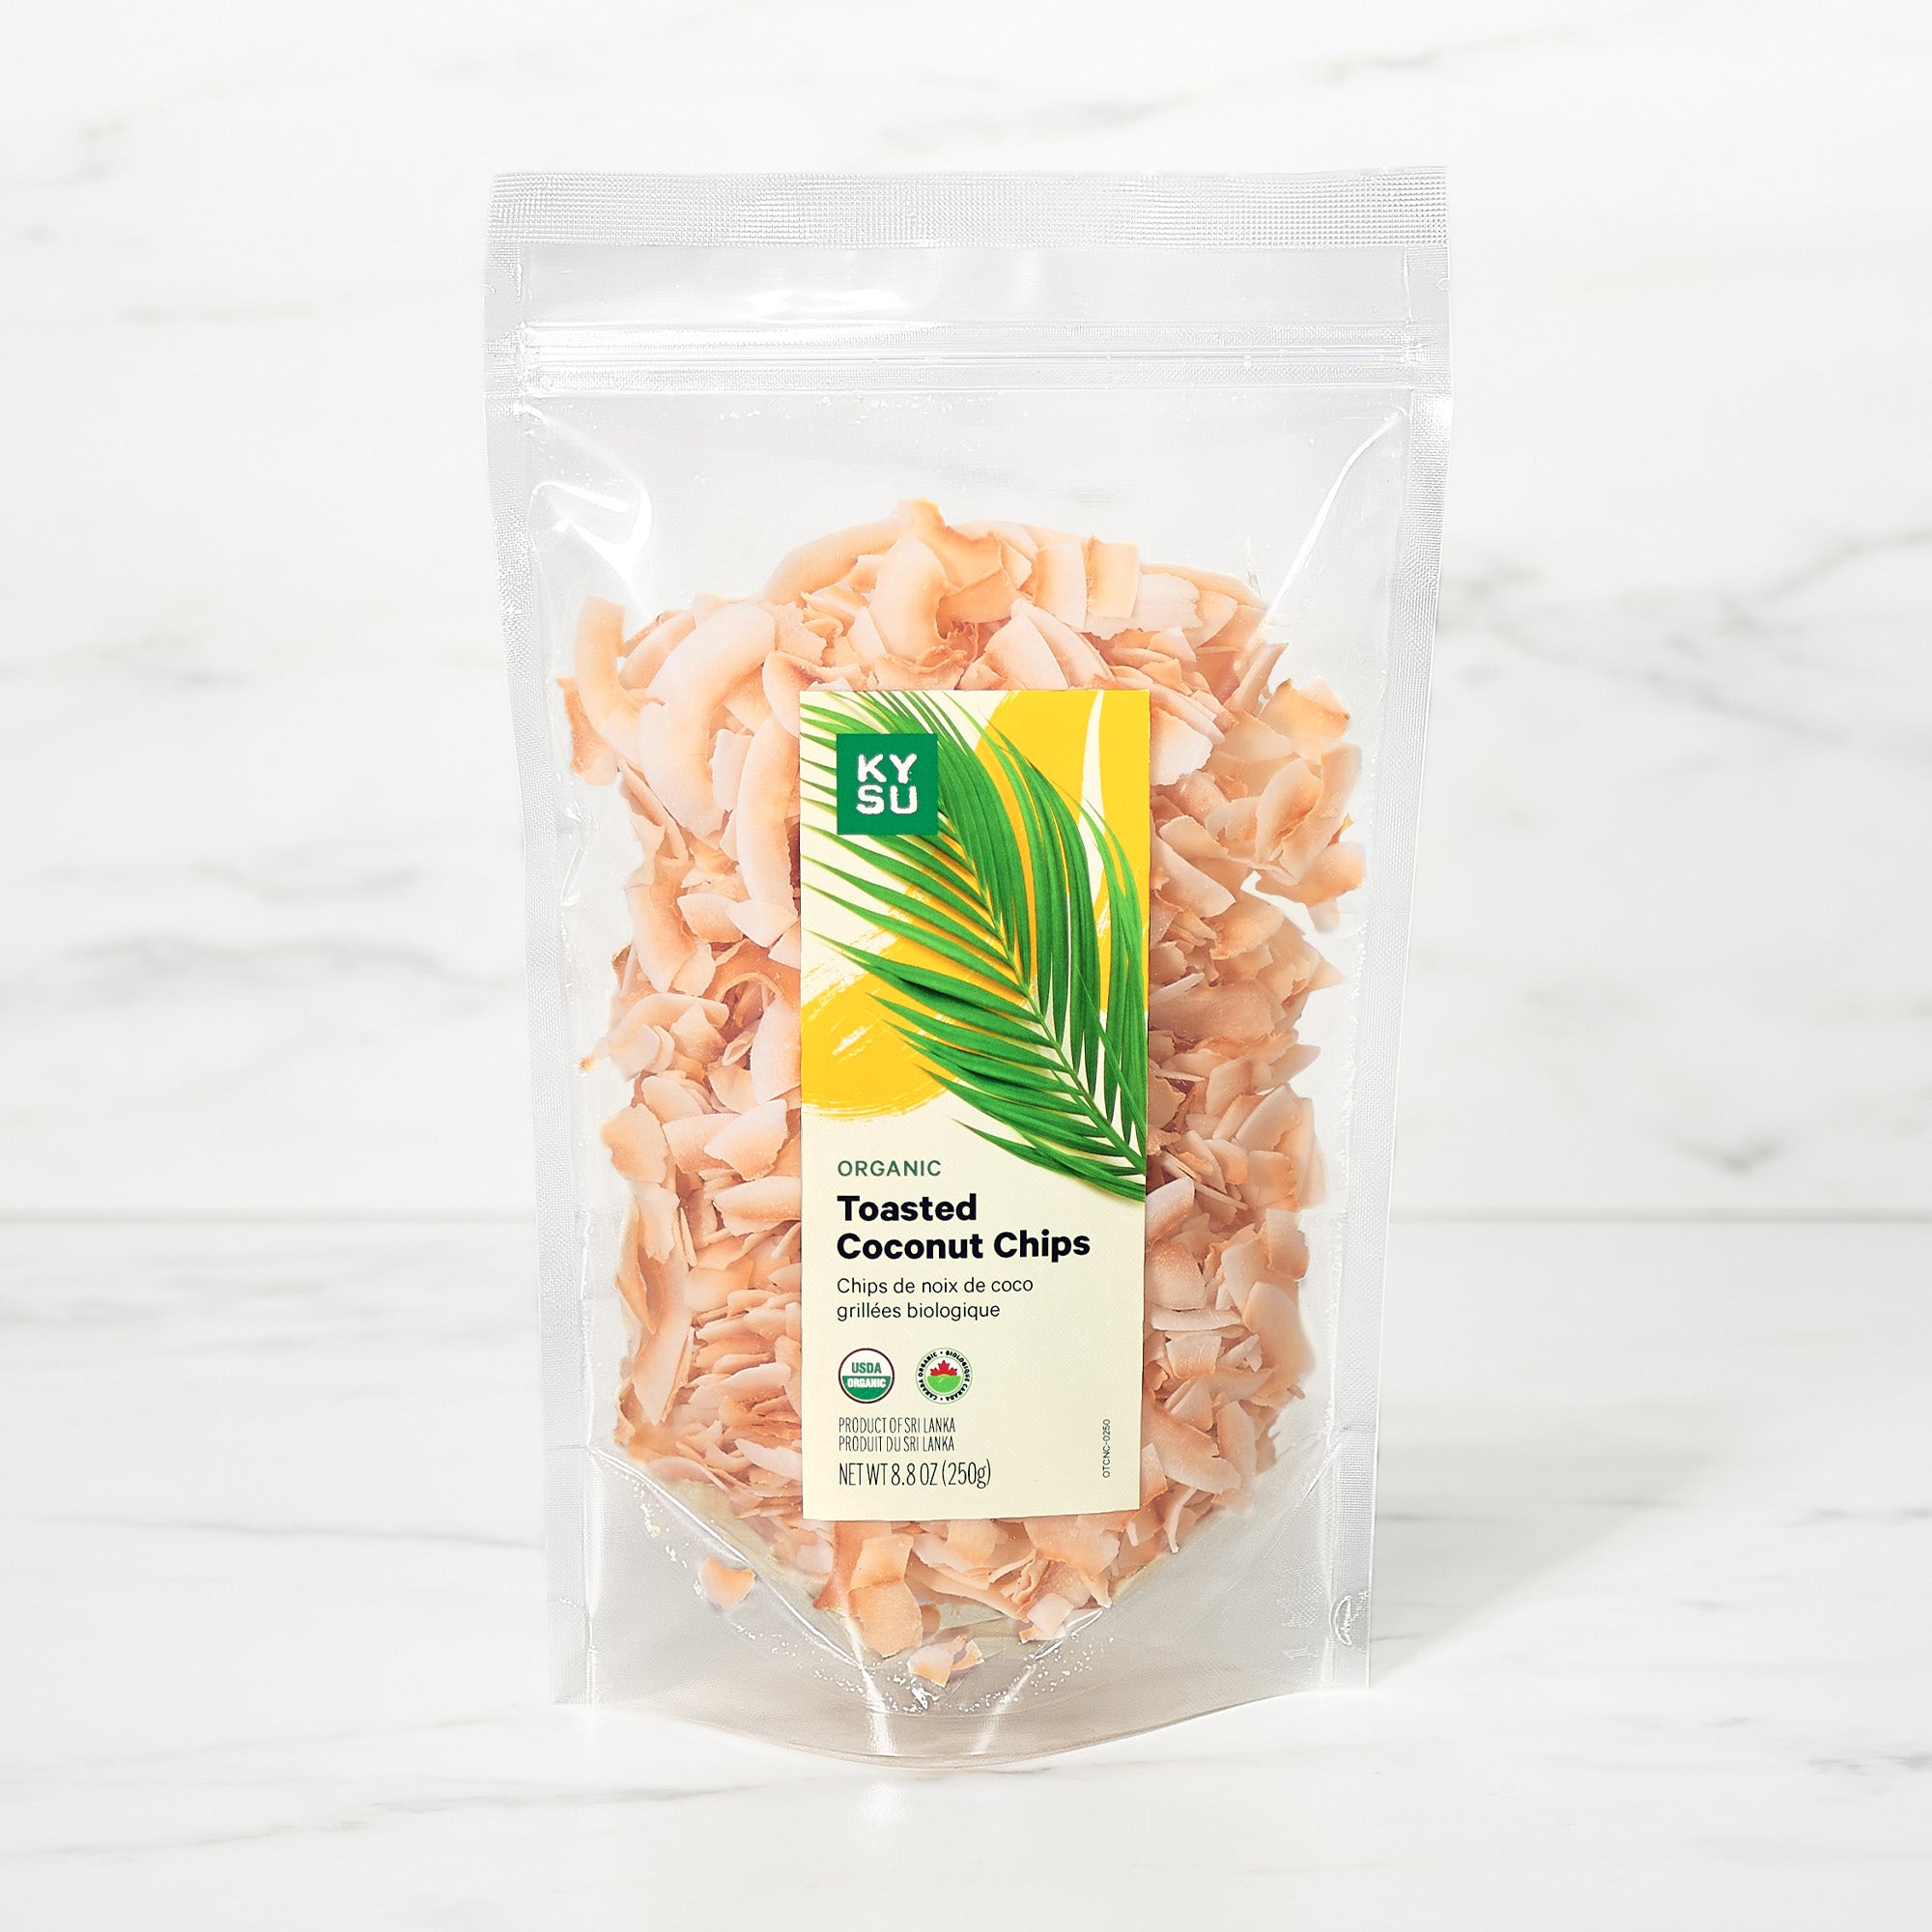 Organic toasted coconut chips, 8.8 oz